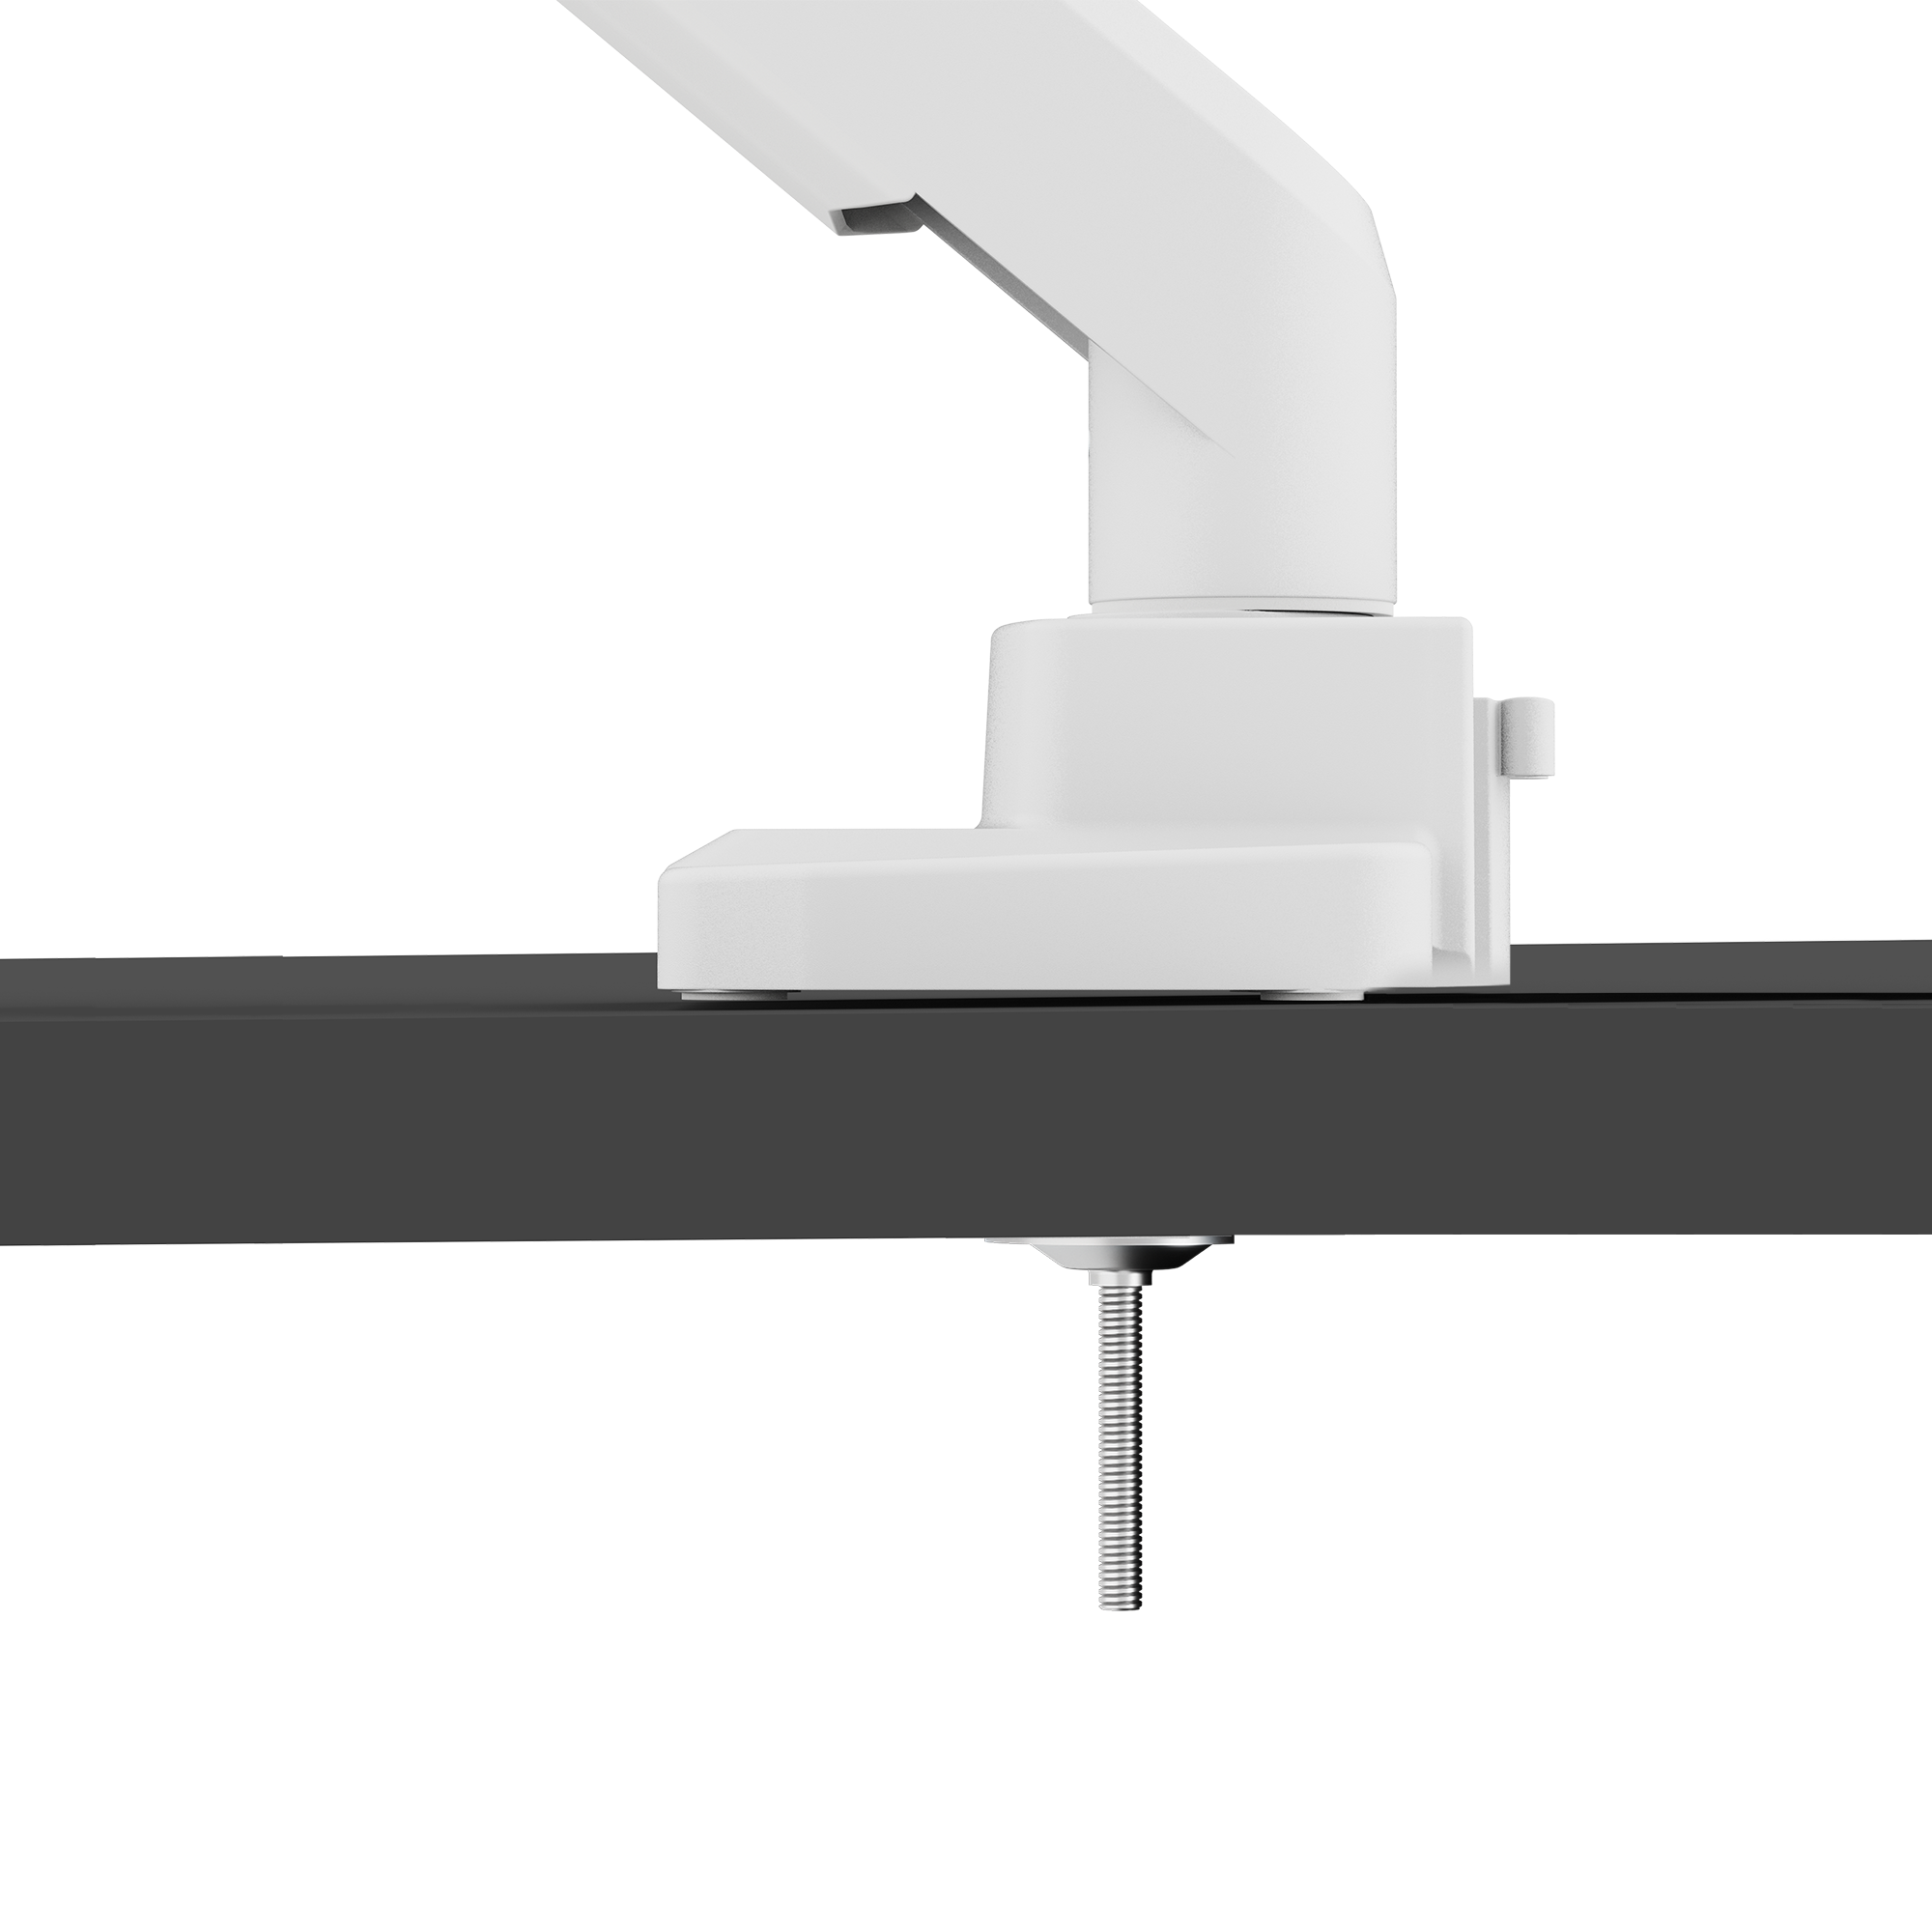 PS2S White Heavy-Duty Single Monitor Arm Mount - Certified Refurbished